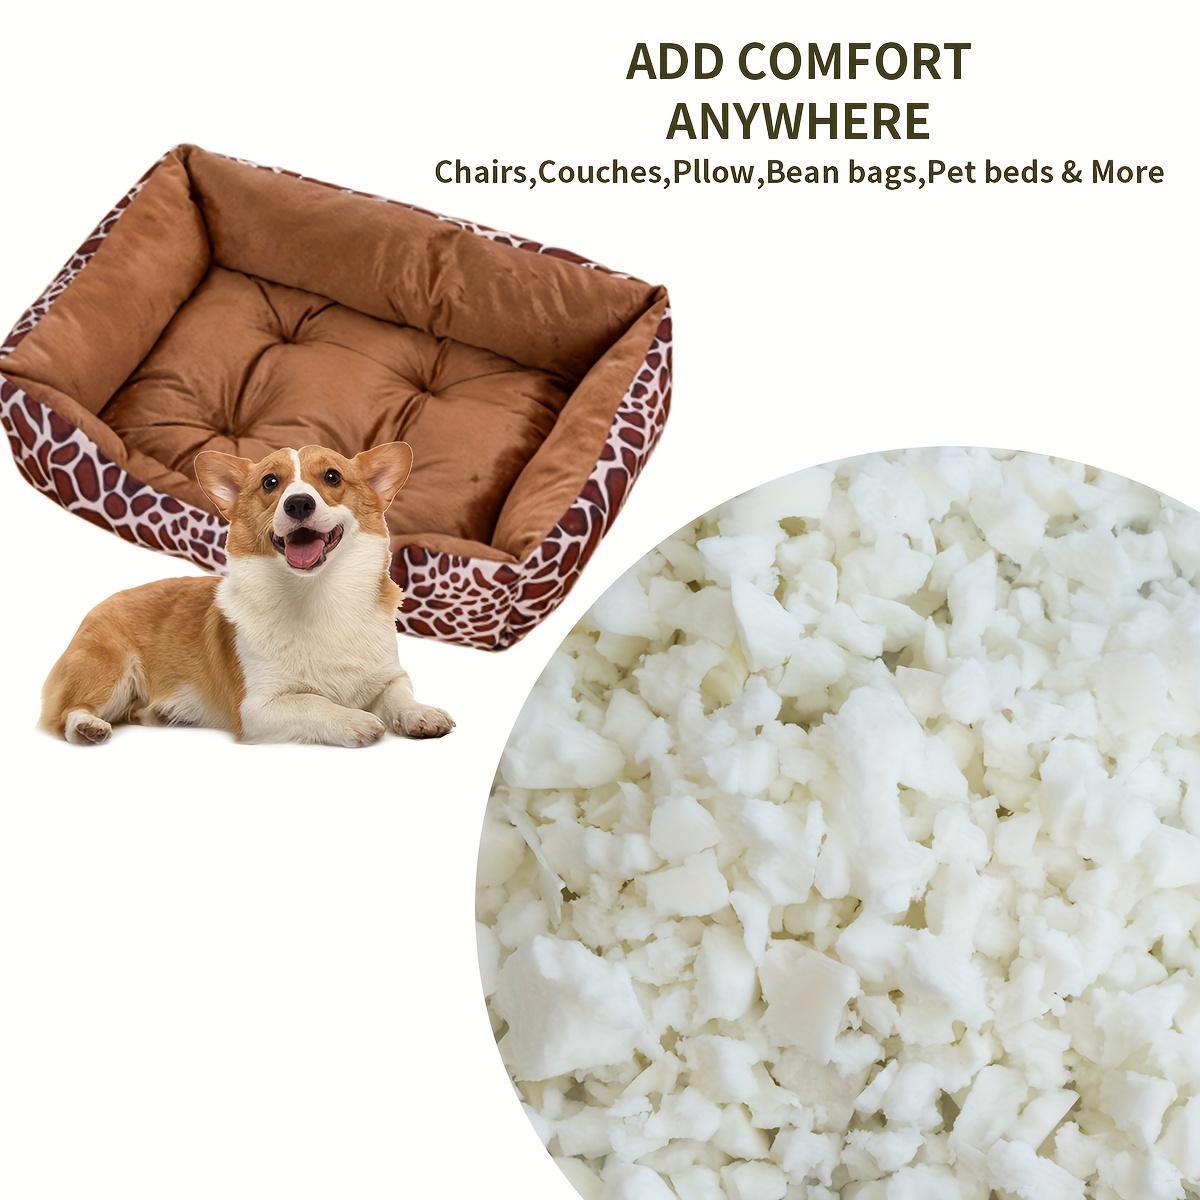 anzhixiu Bean Bag Filler Shredded Memory Foam 100% New 10 Pounds Pillow  Stuffing for Couch Pillows Stuffed Animals Dog Bed & Couch Cushion Filling  10 Pounds White 10 Pounds